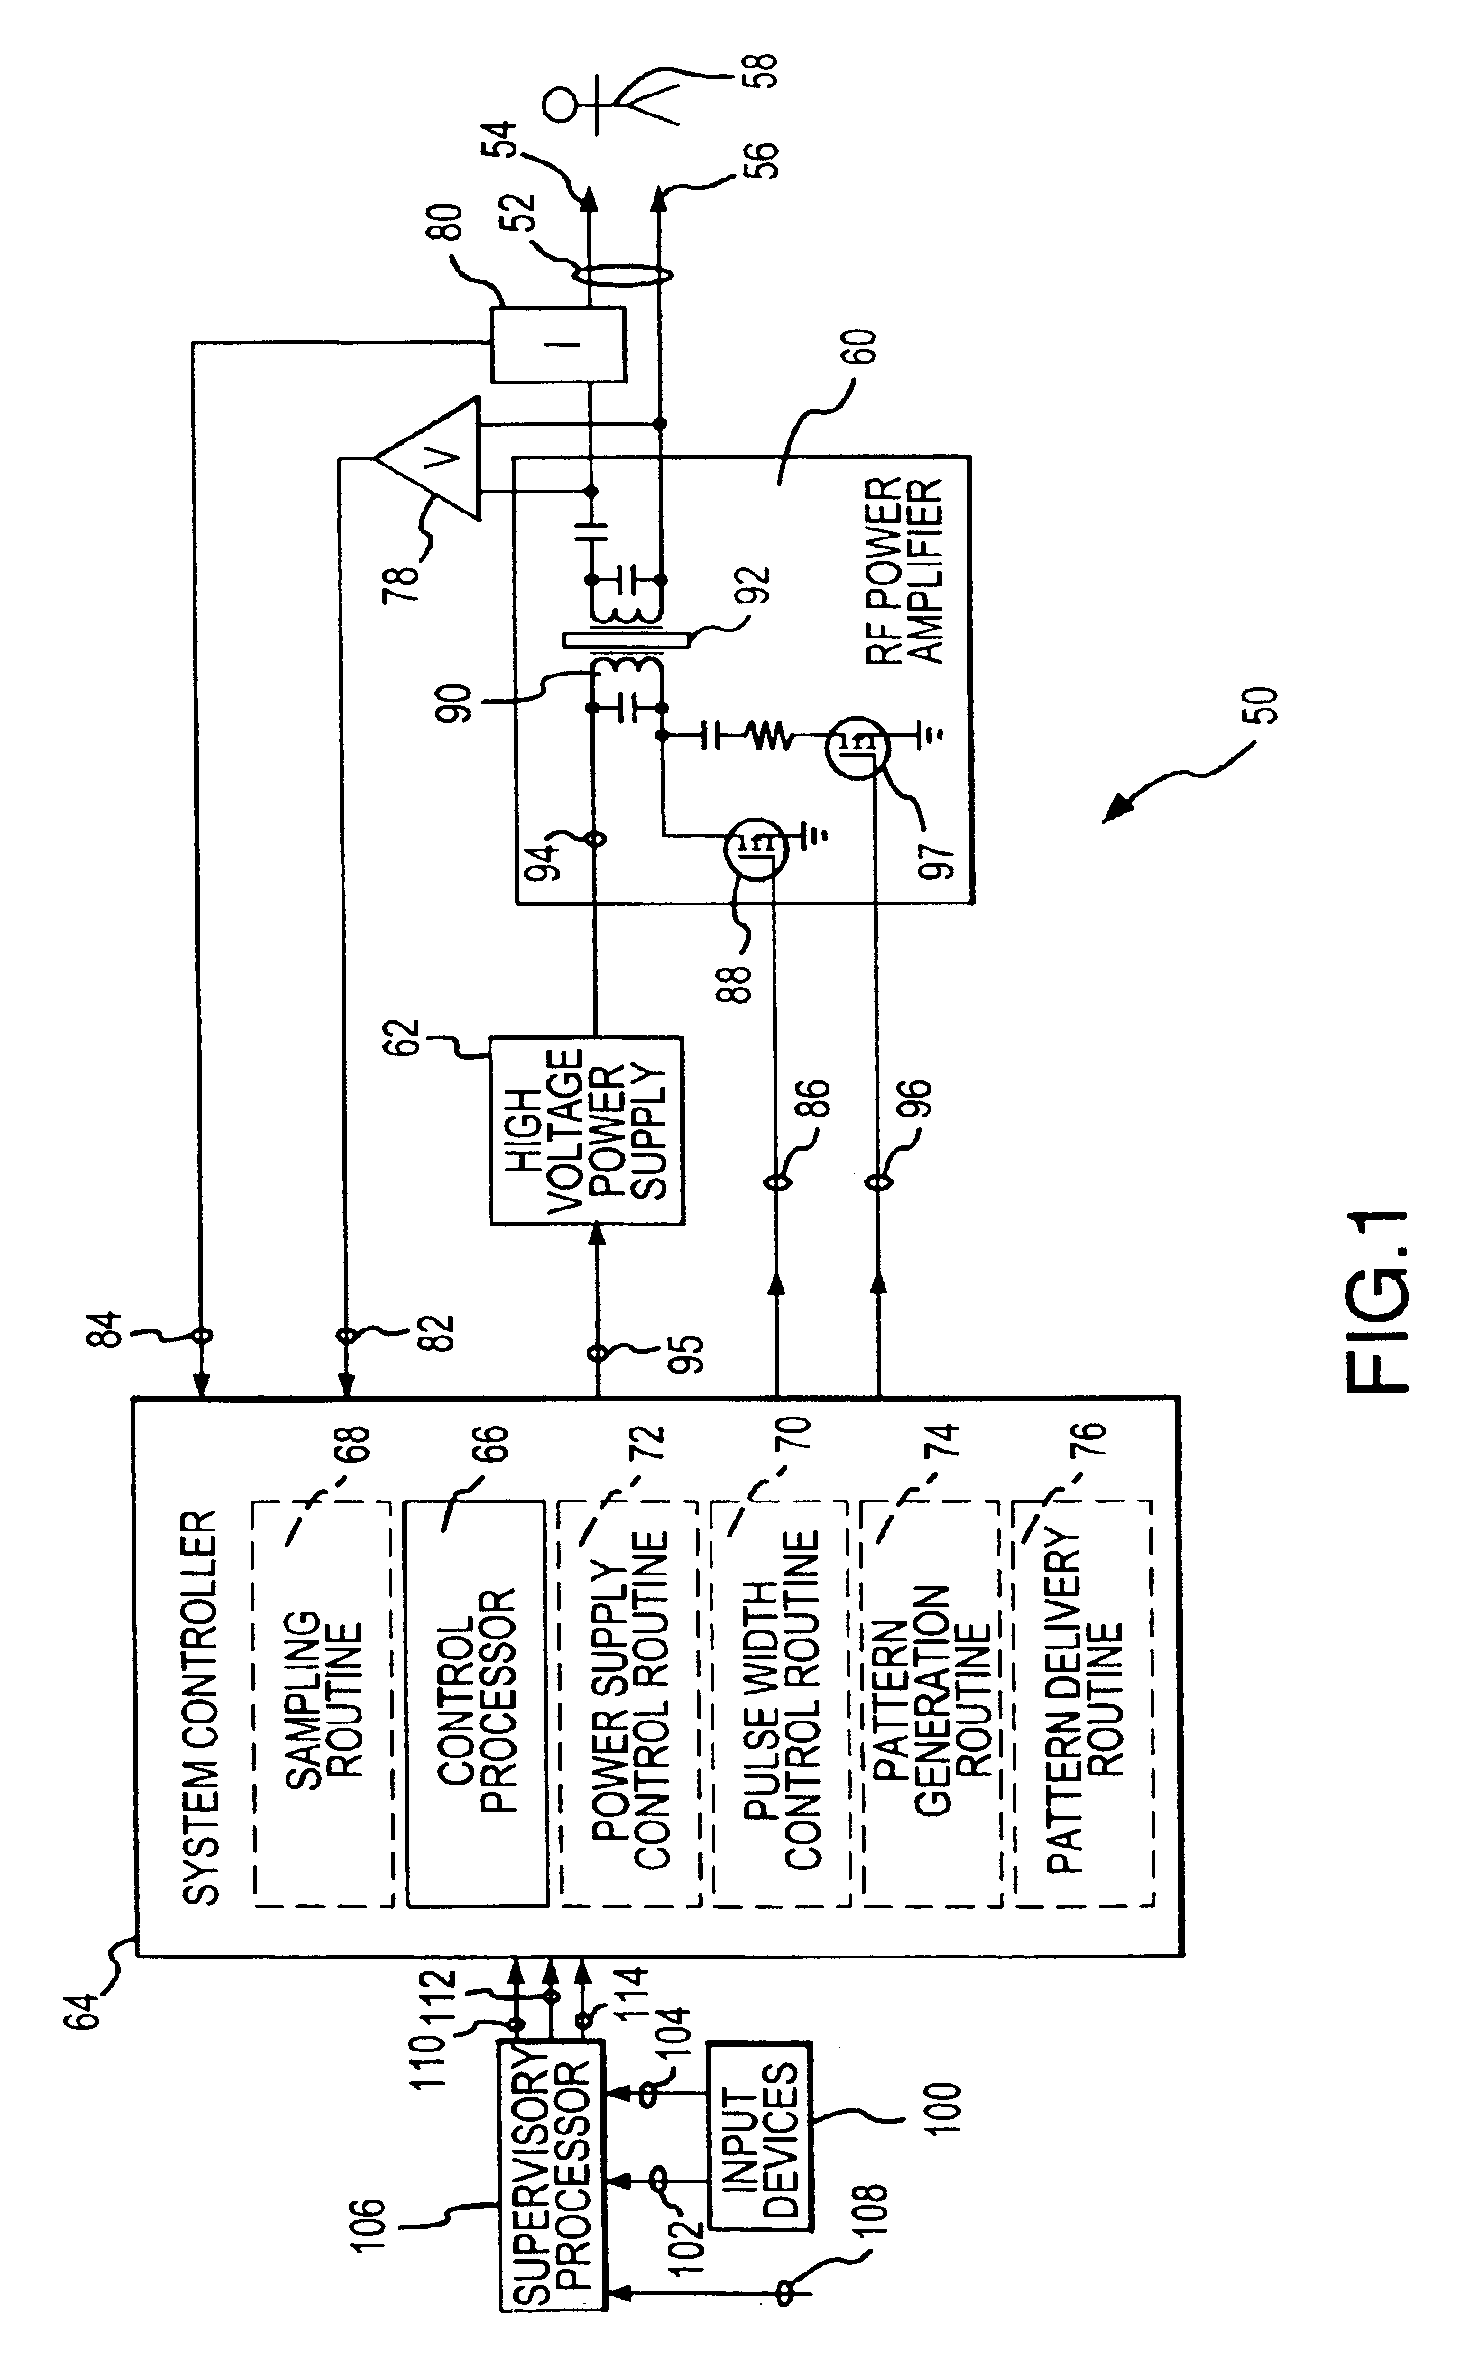 Electrosurgical generator and method with multiple semi-autonomously executable functions